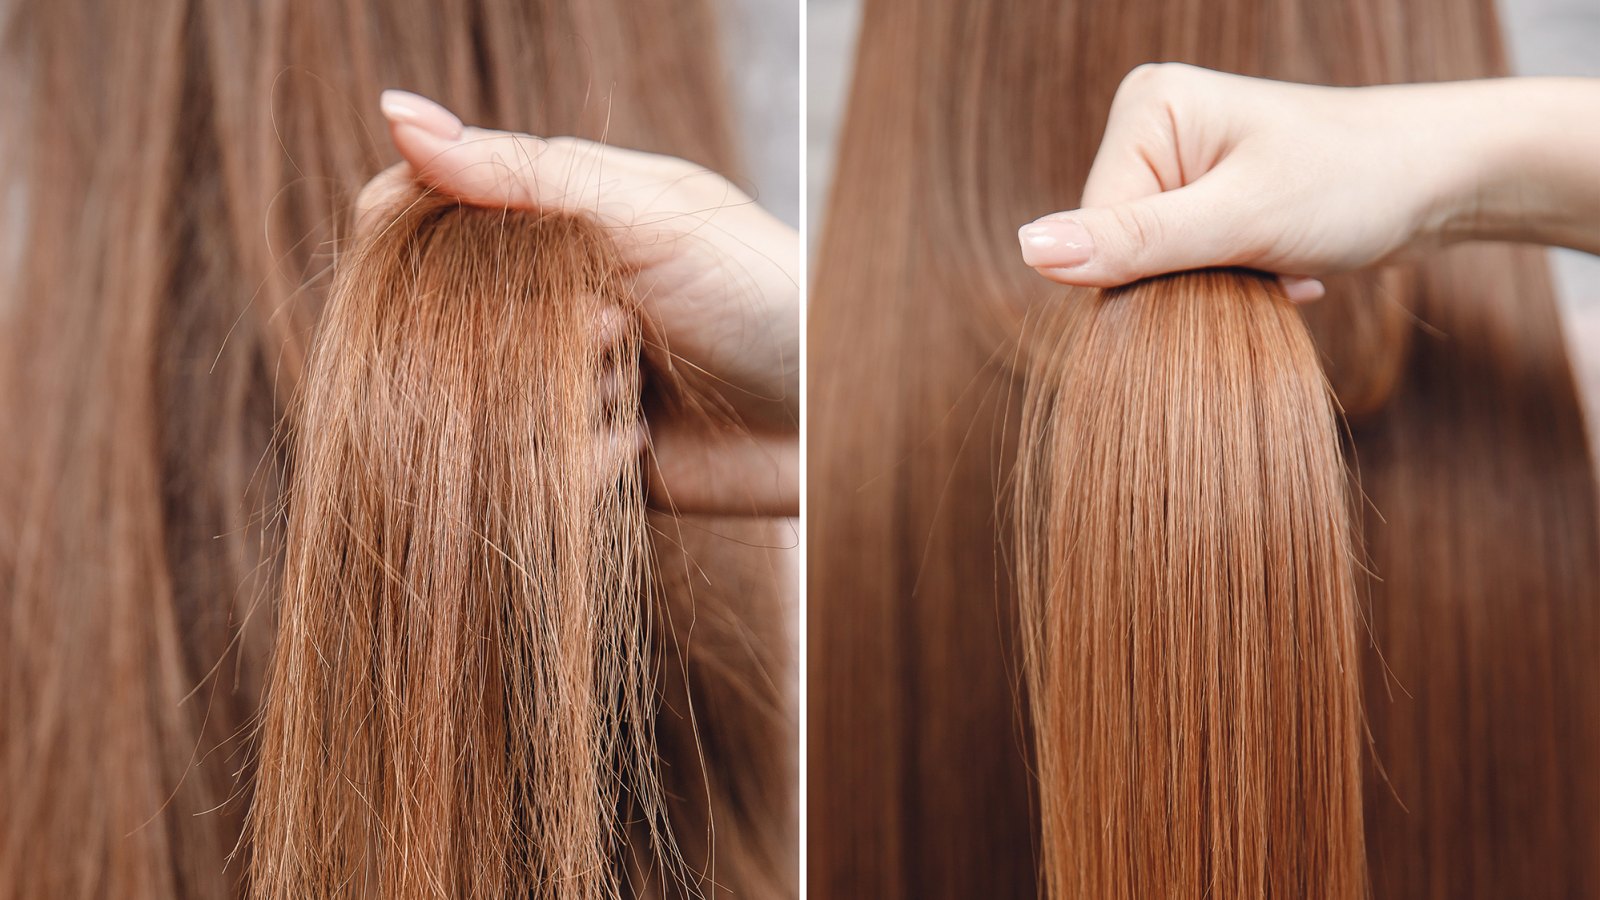 Olaplex No. 5 Conditioner Is Changing Our Hair for the Better